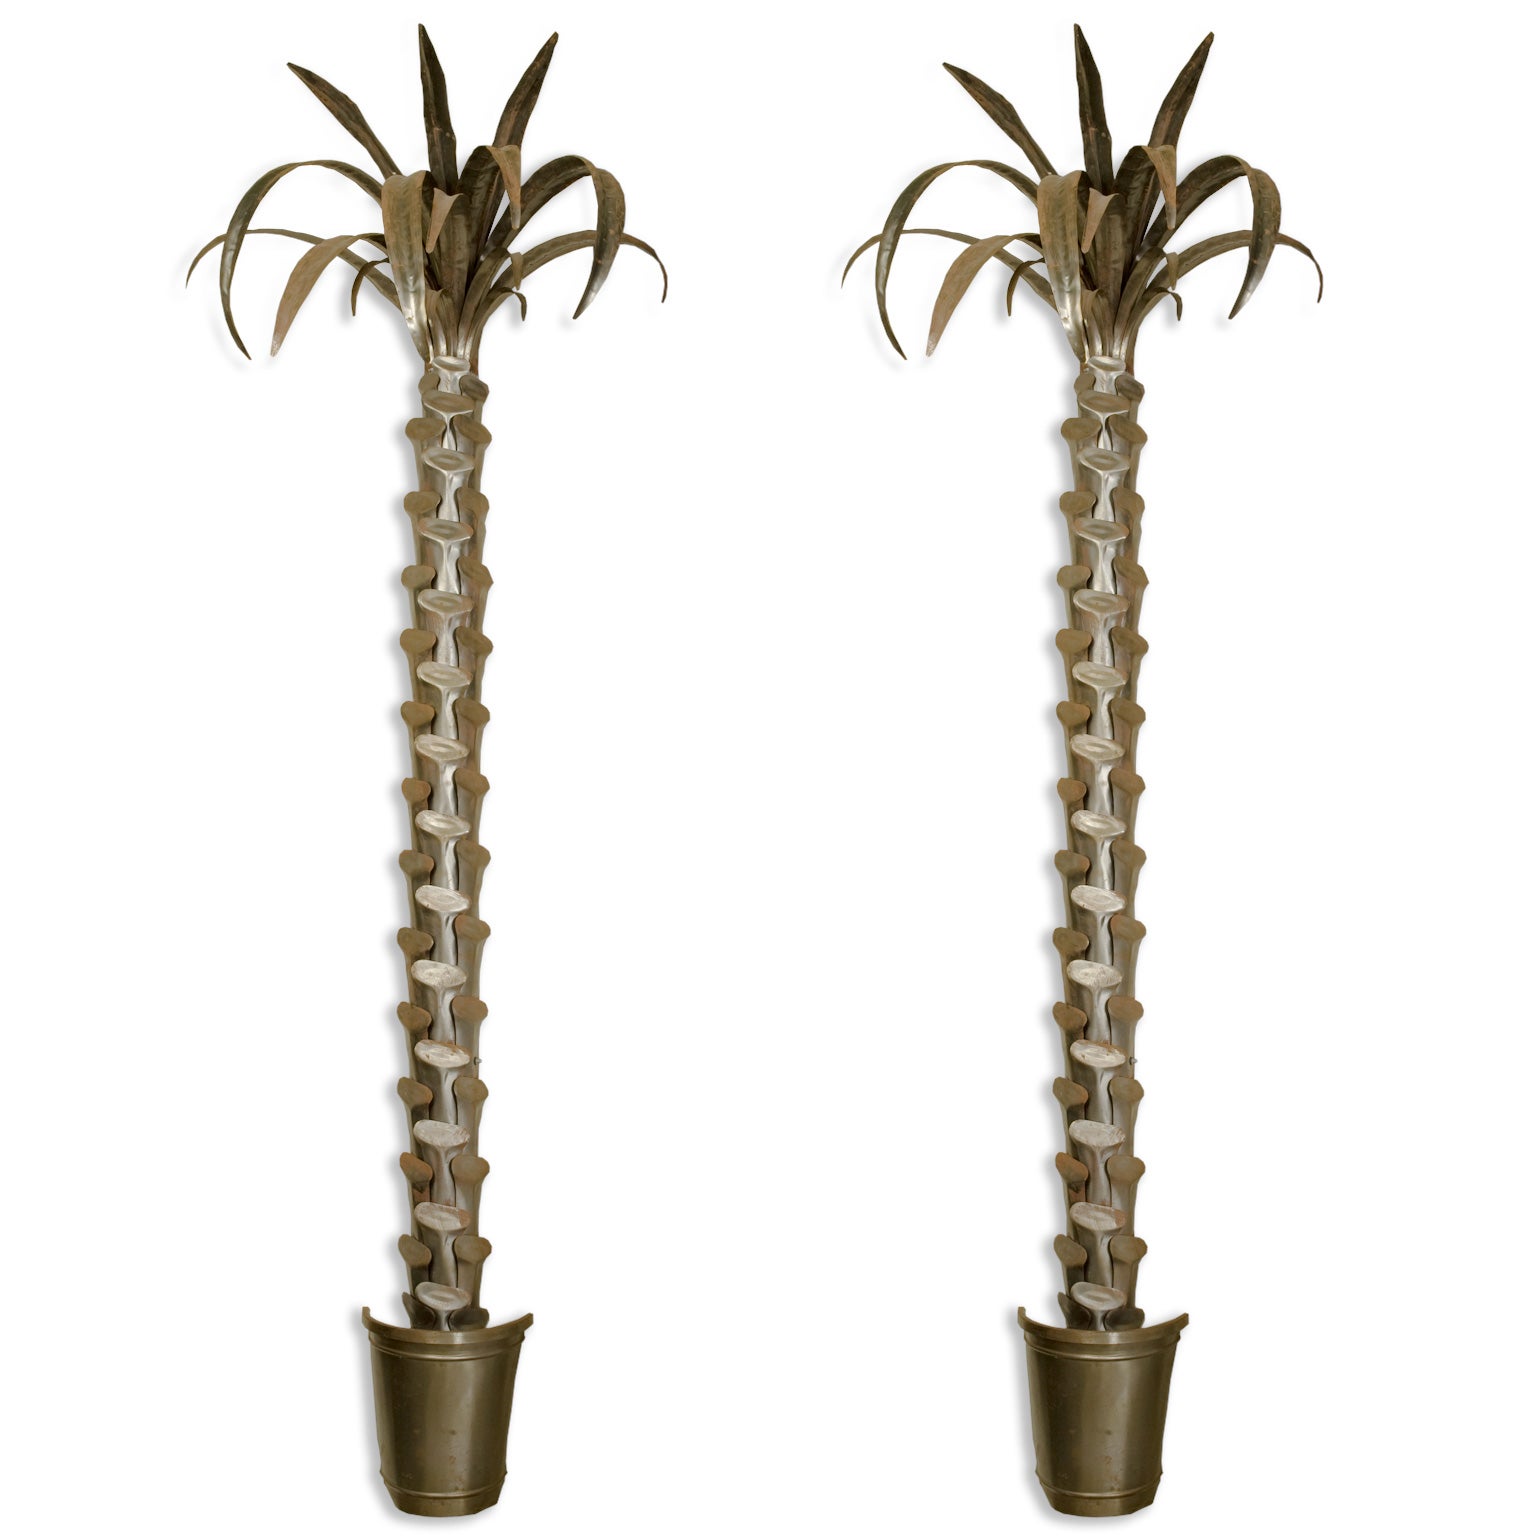 Pair of Large, Over 8' Metal Palm Tree Wall Sconces